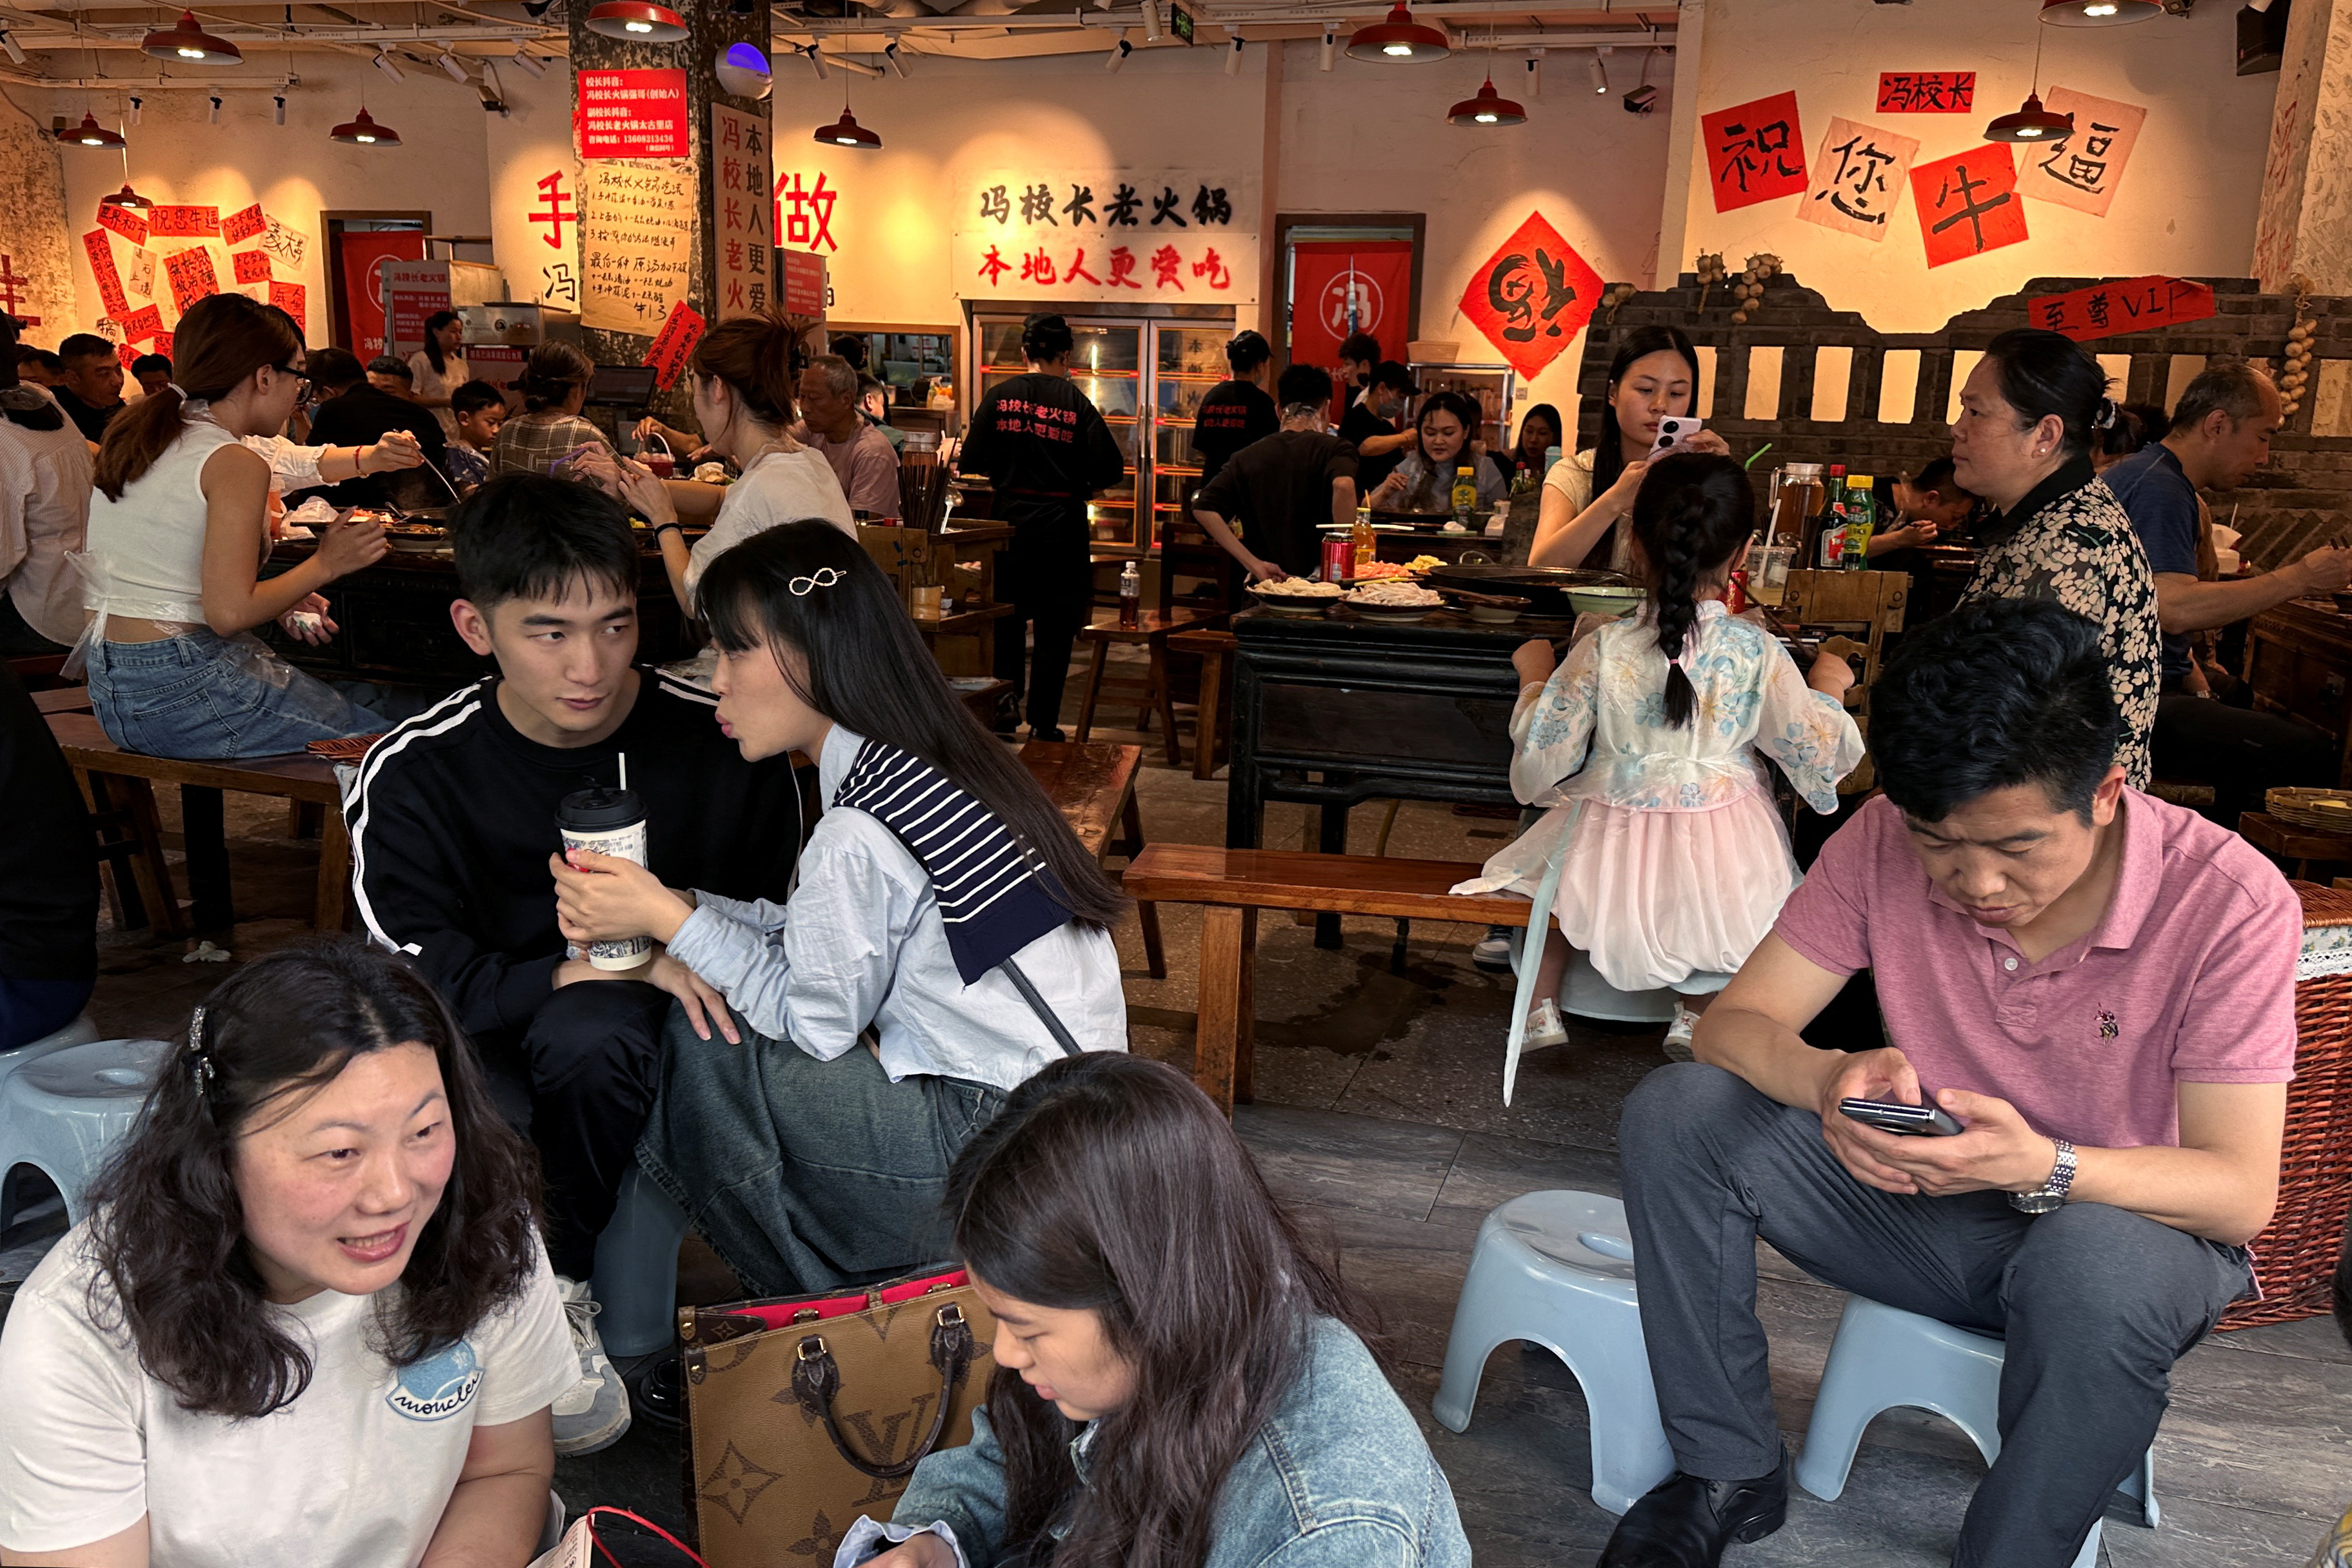 People wait for a table at a restaurant in Chengdu